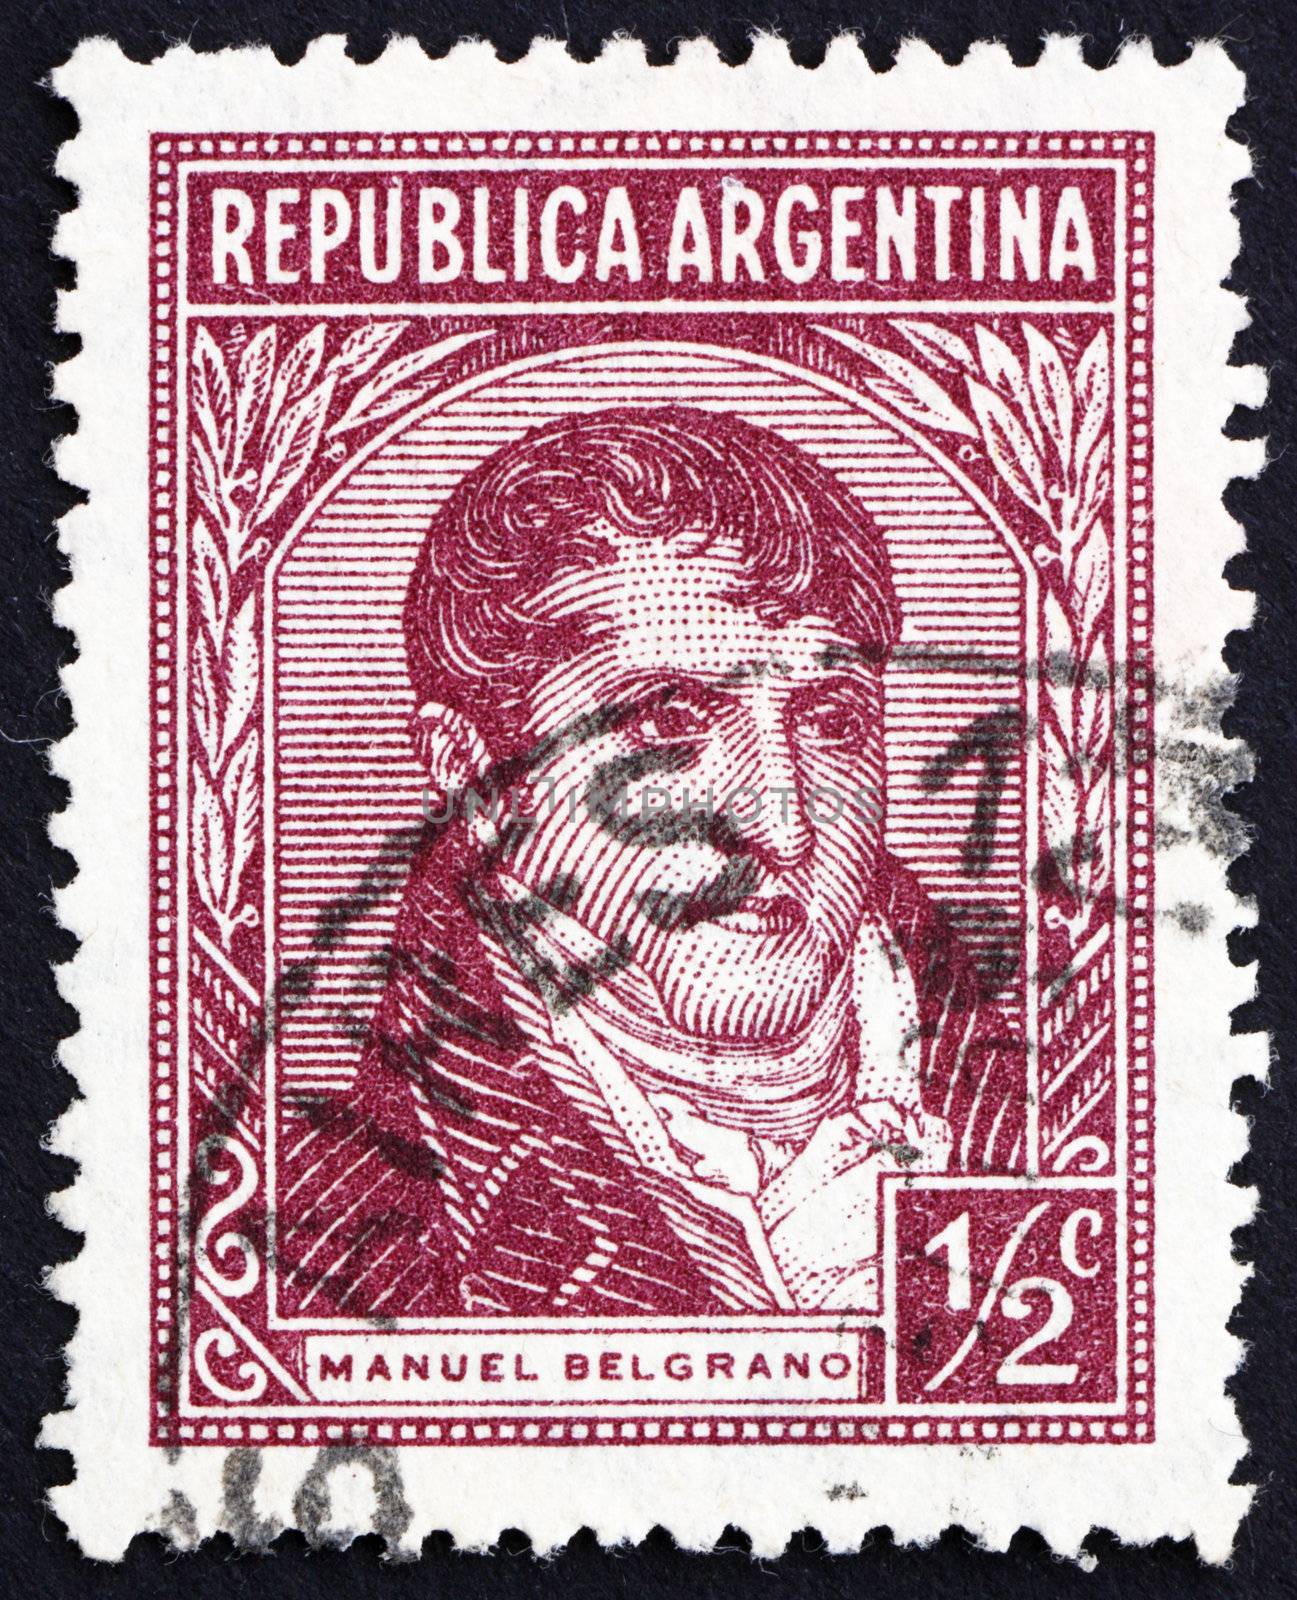 ARGENTINA - CIRCA 1935: a stamp printed in the Argentina shows Manuel Belgrano, Economist, Lawyer, Politician and Military Leader, circa 1935